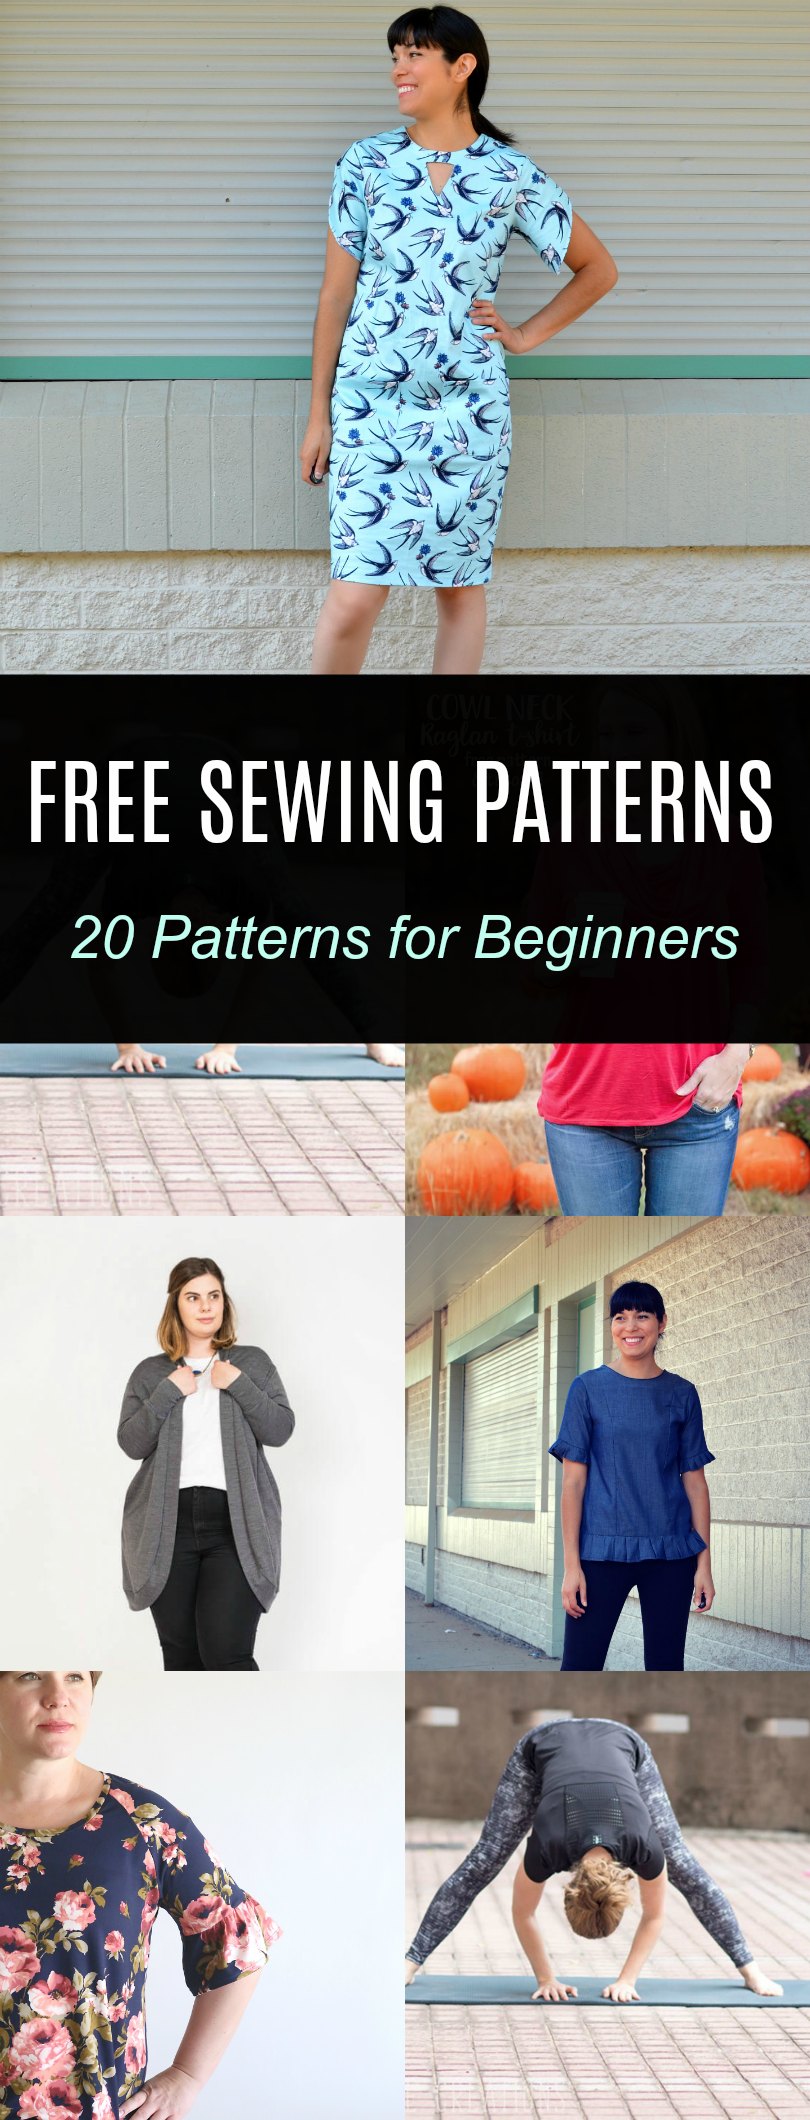 FREE PATTERN ALERT: 20 Sewing patterns for Beginners | On the Cutting ...